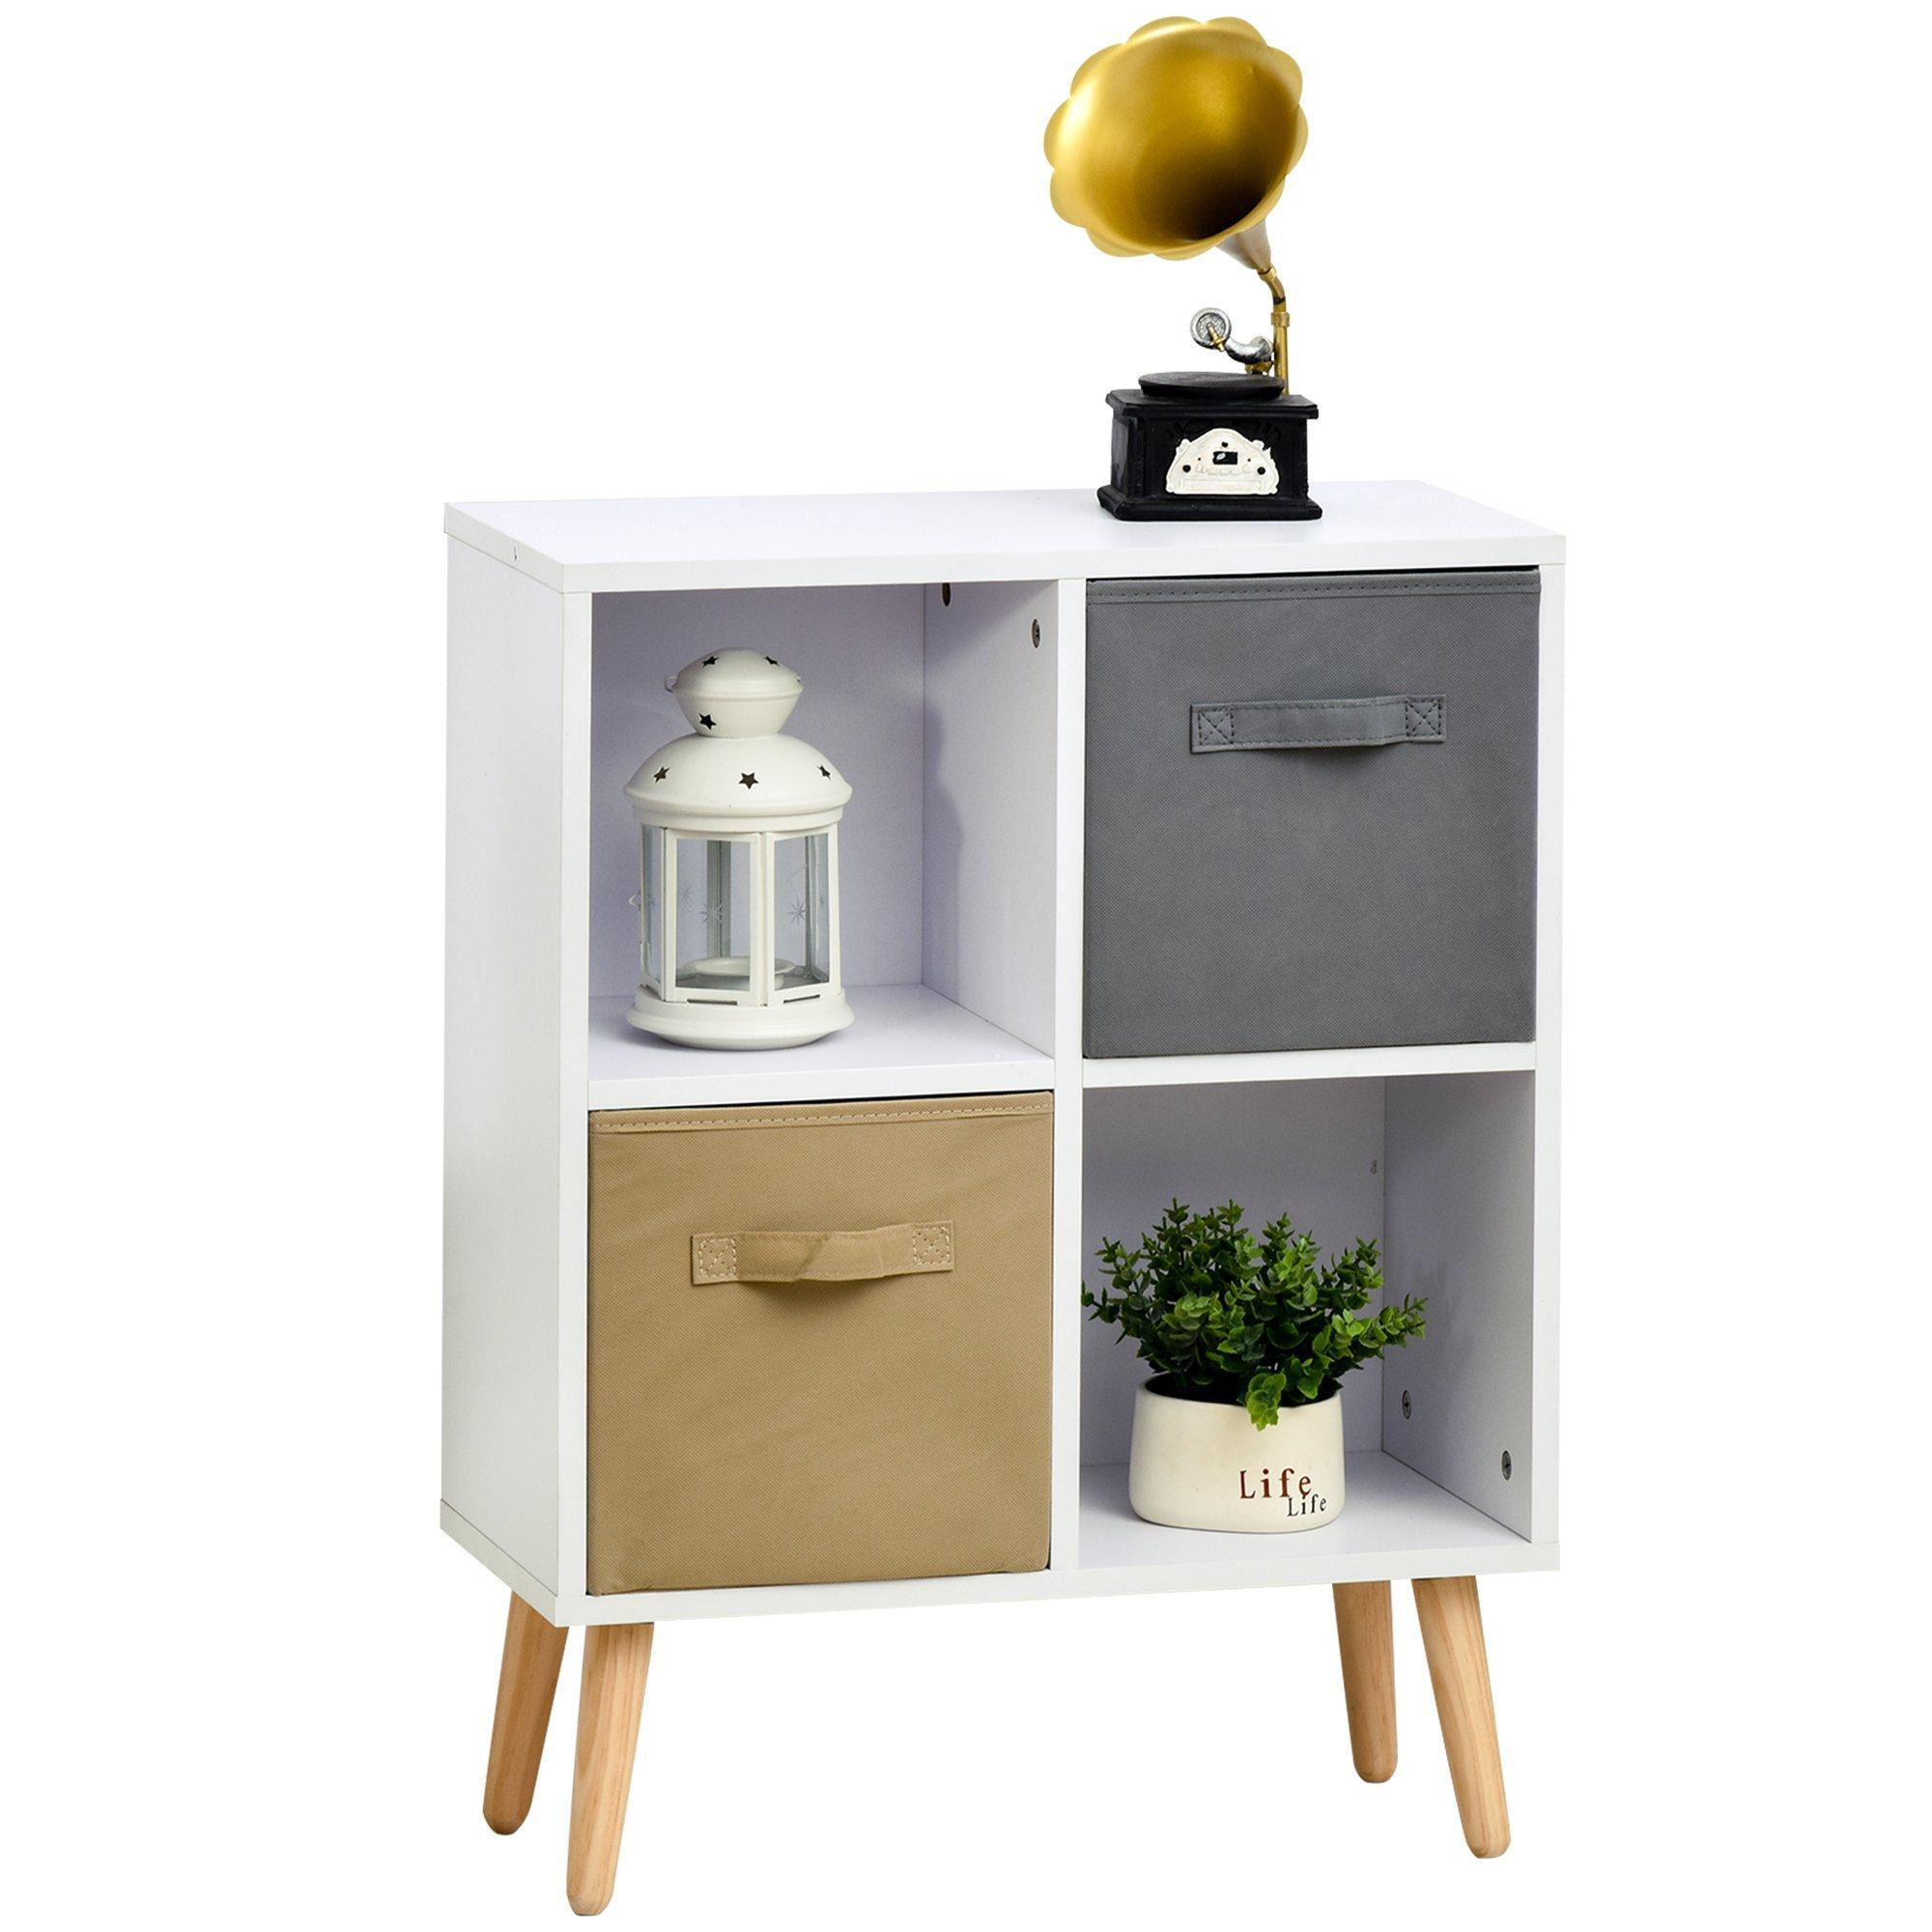 Freestanding 4 Cube Storage Cabinet Unit with 2 Drawers Bookcase - image 1